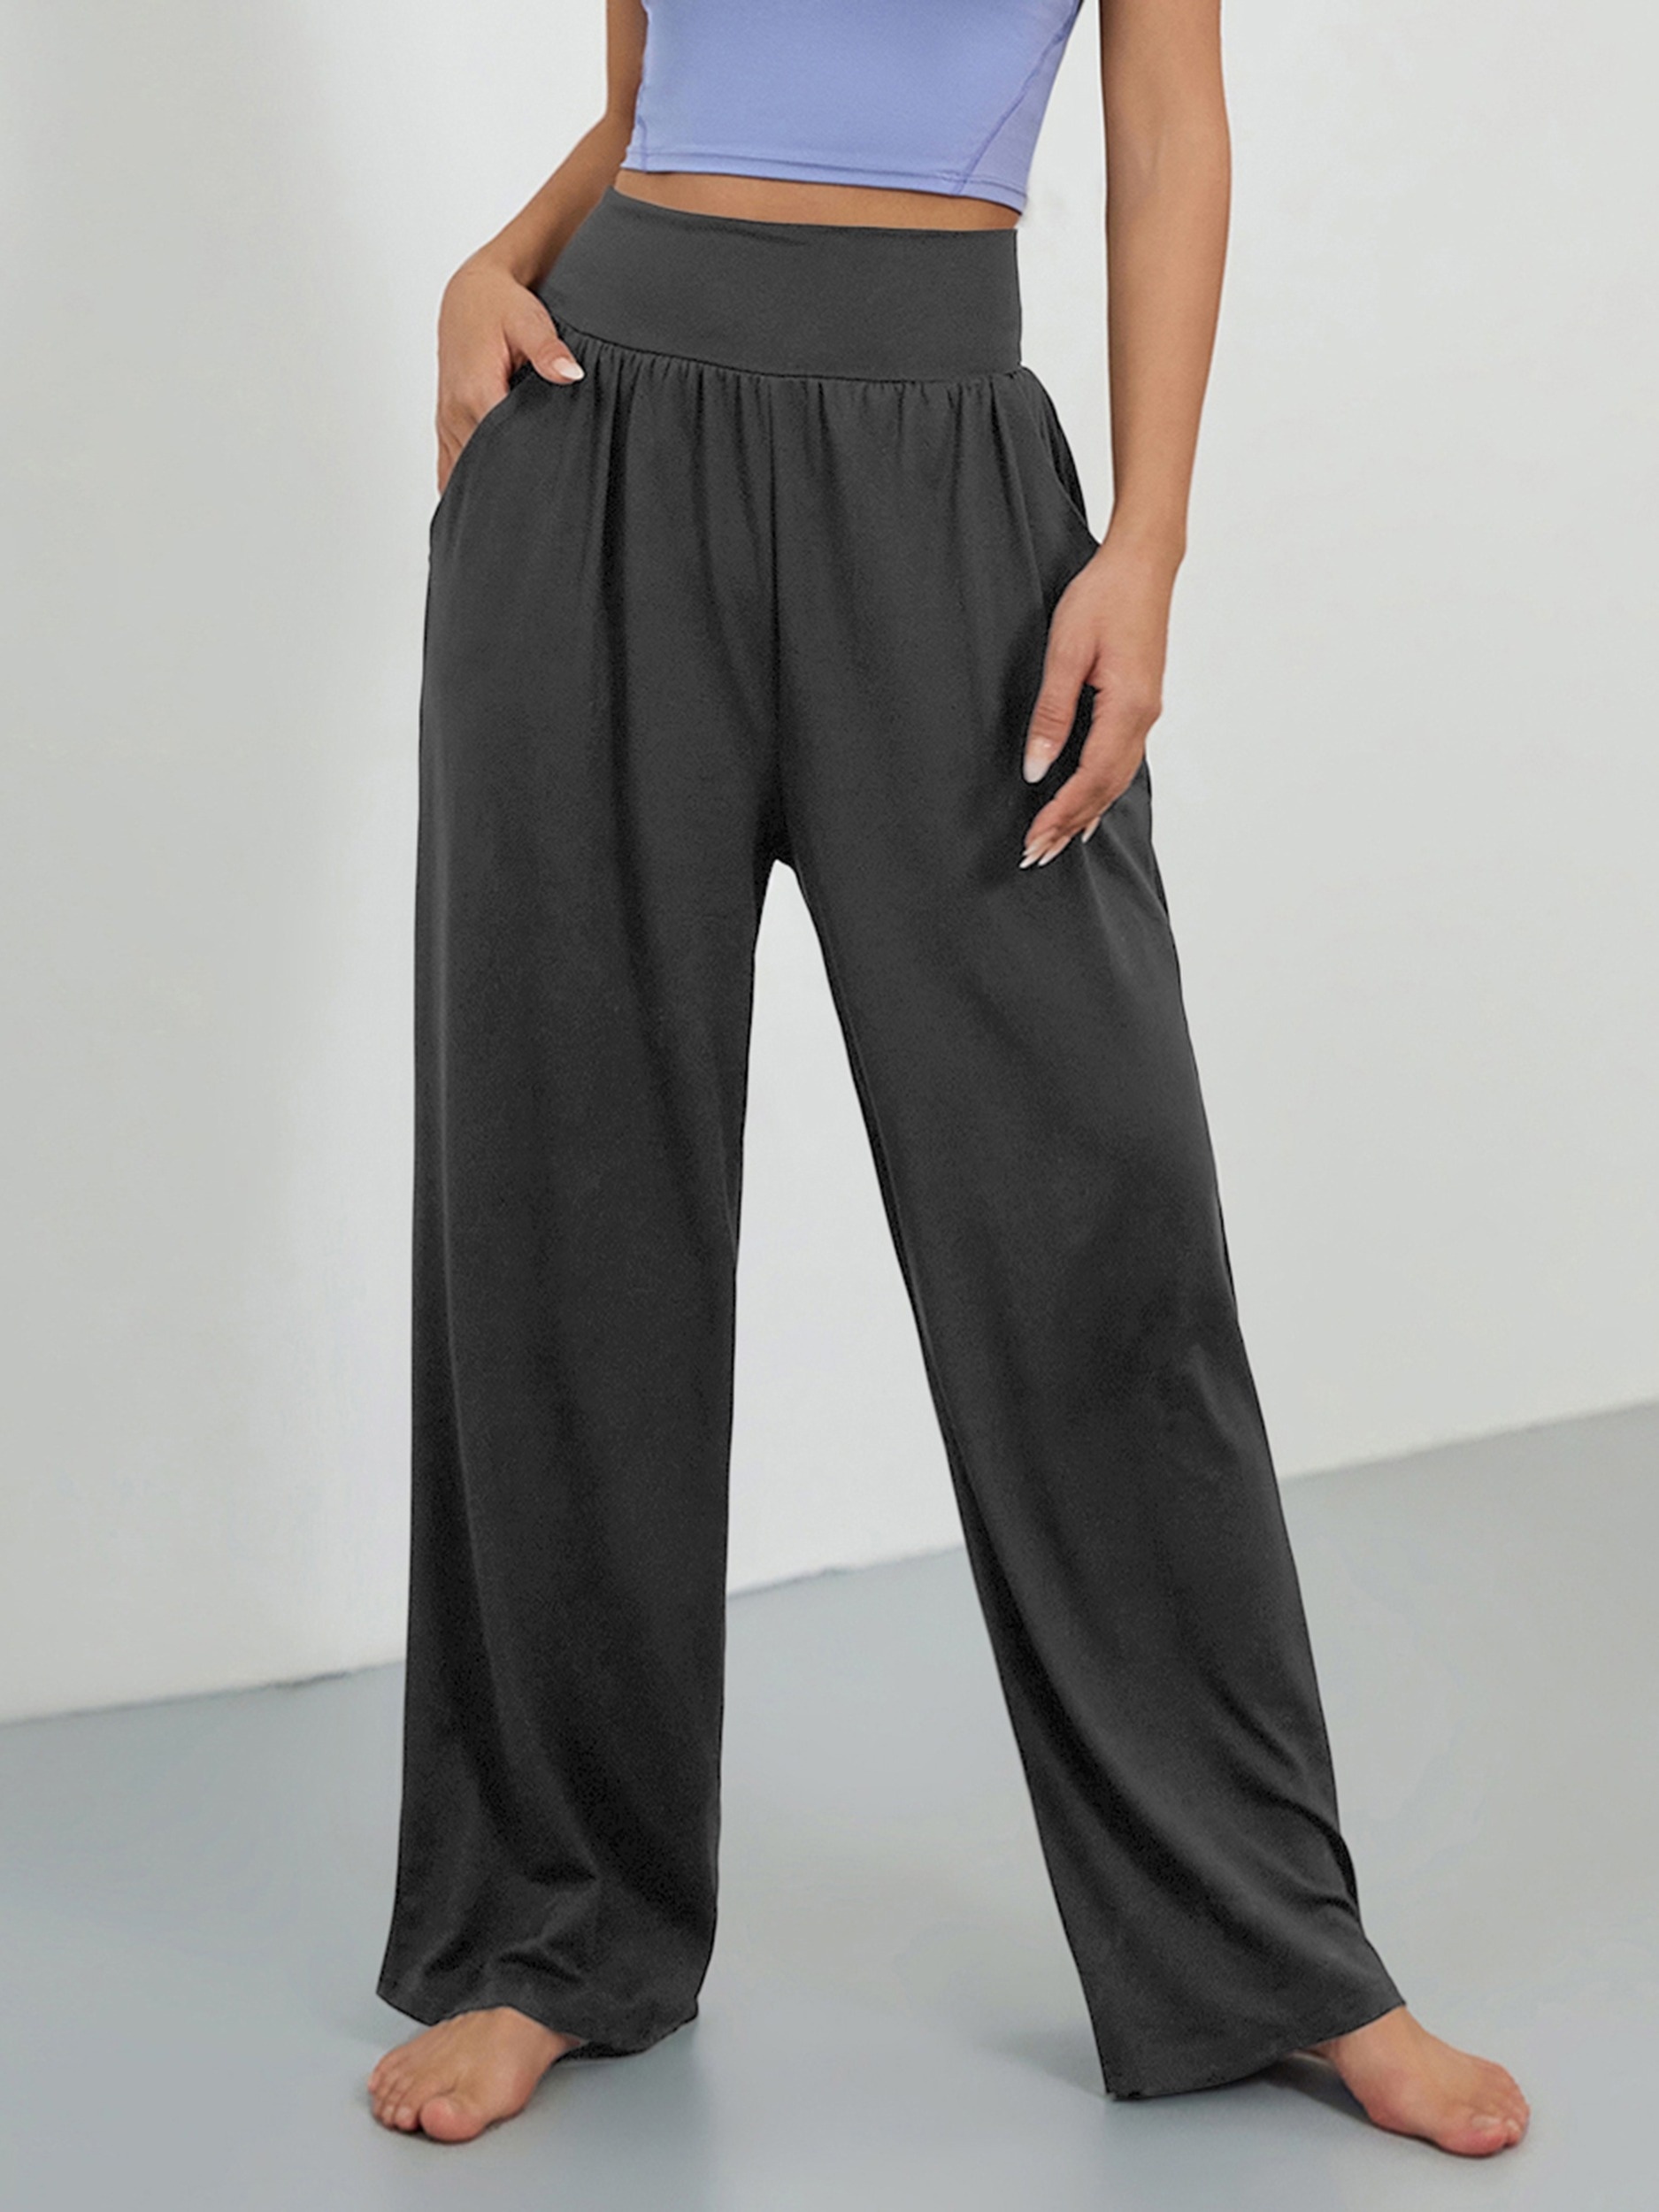 Casual Soft Lounge Pants For Women's